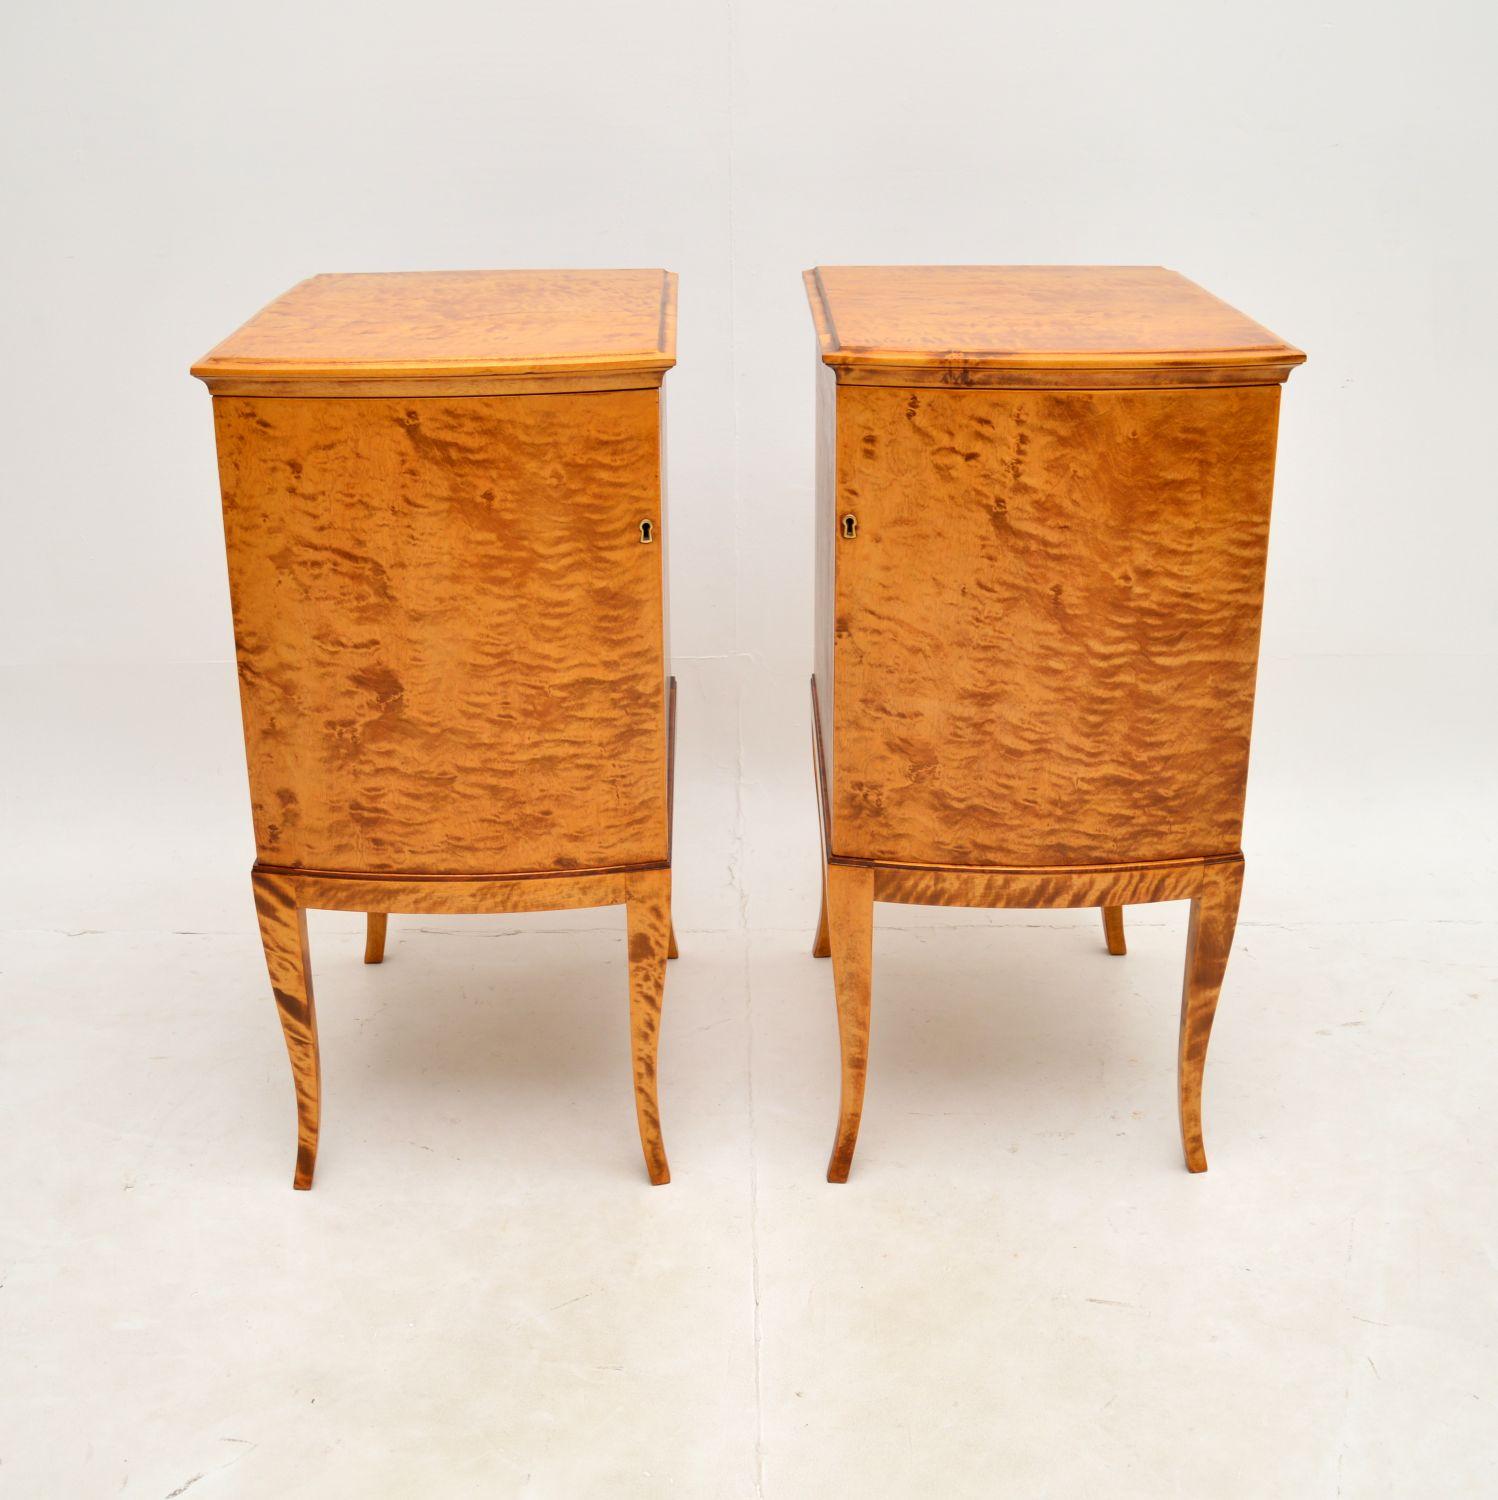 A large and very impressive pair of antique Swedish satin birch bedside cabinets. They were recently imported from Sweden, and date from around the 1900-1910 period.

The satin birch grain patterns and colour tones are absolutely gorgeous, they sit